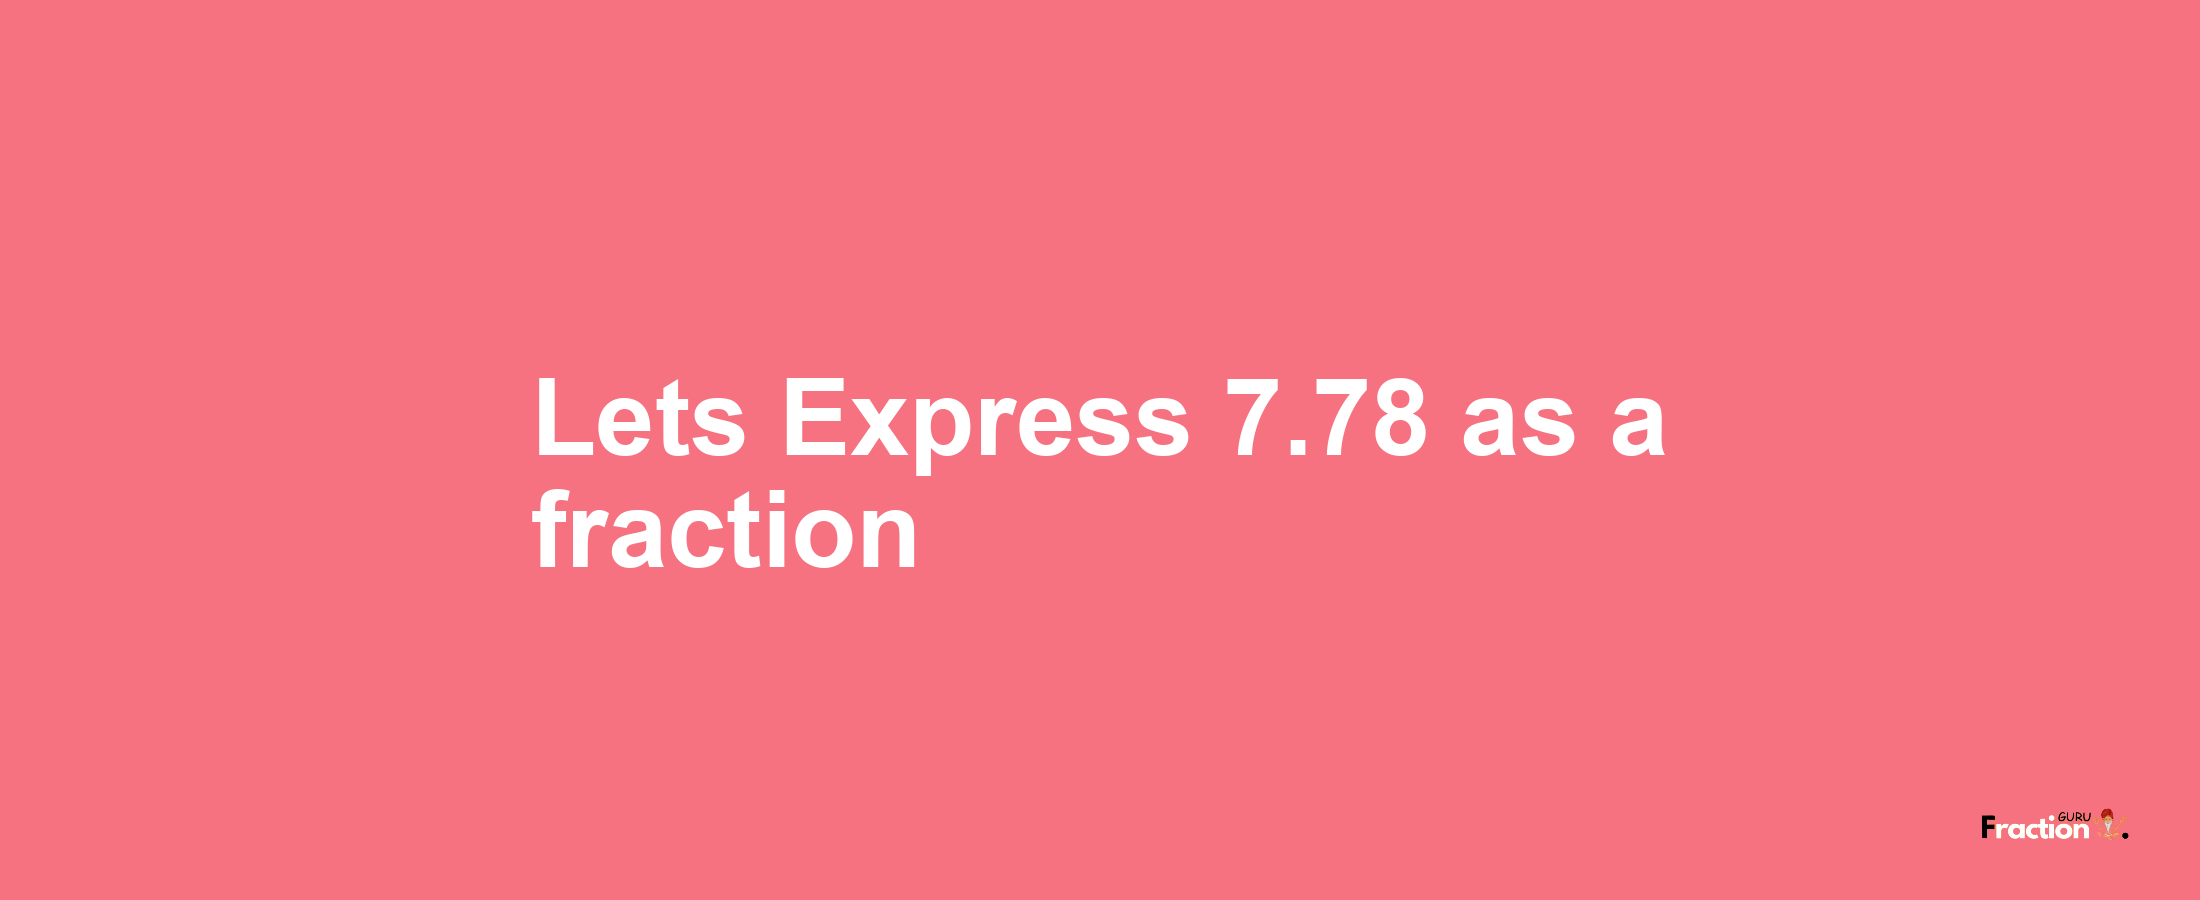 Lets Express 7.78 as afraction